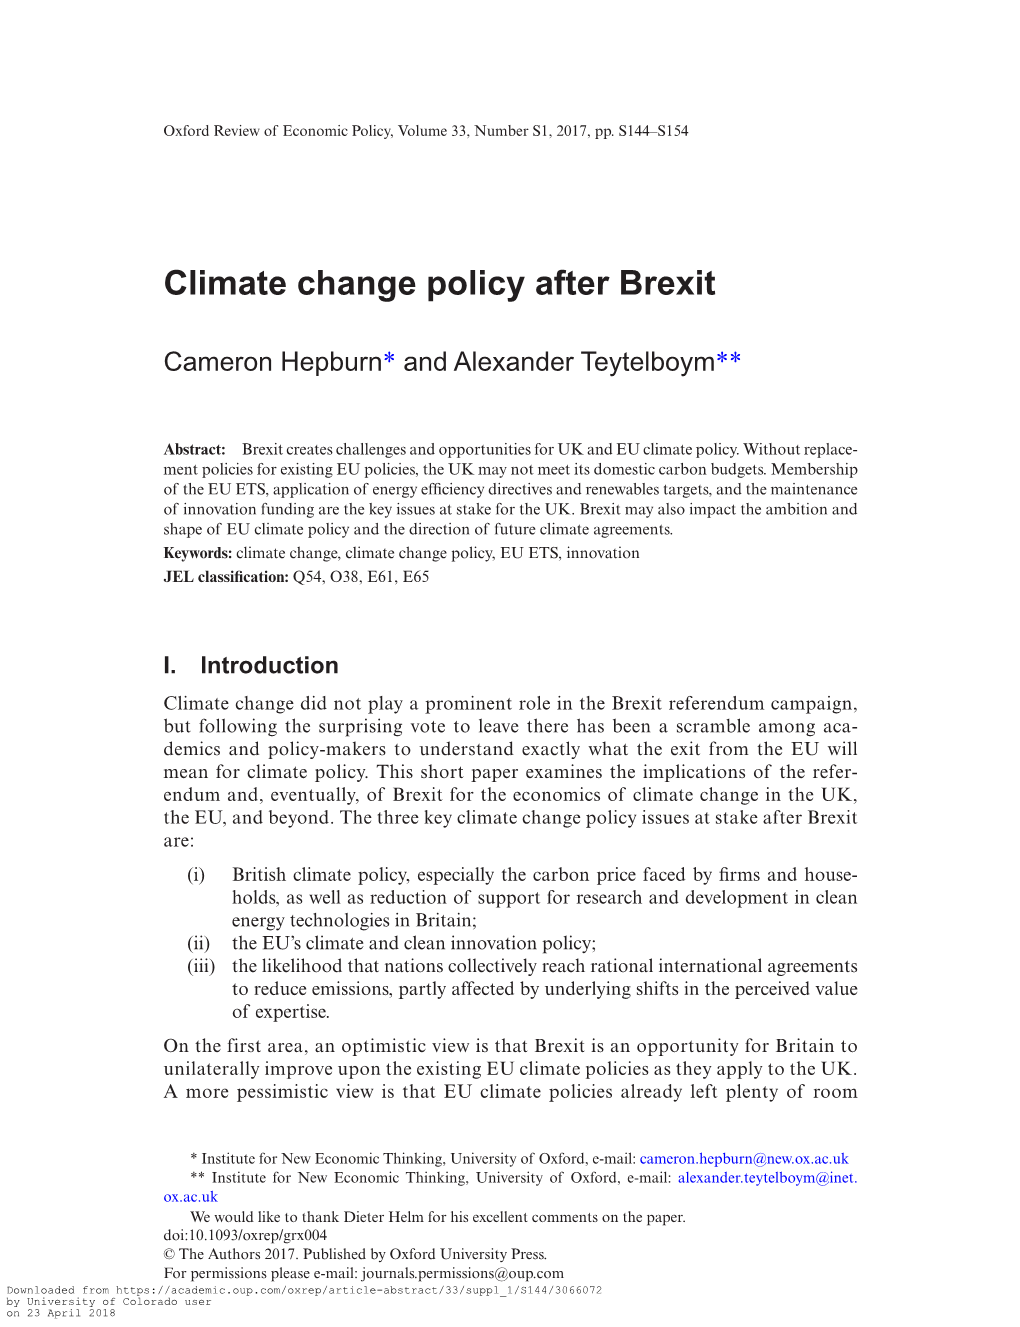 Climate Change Policy After Brexit